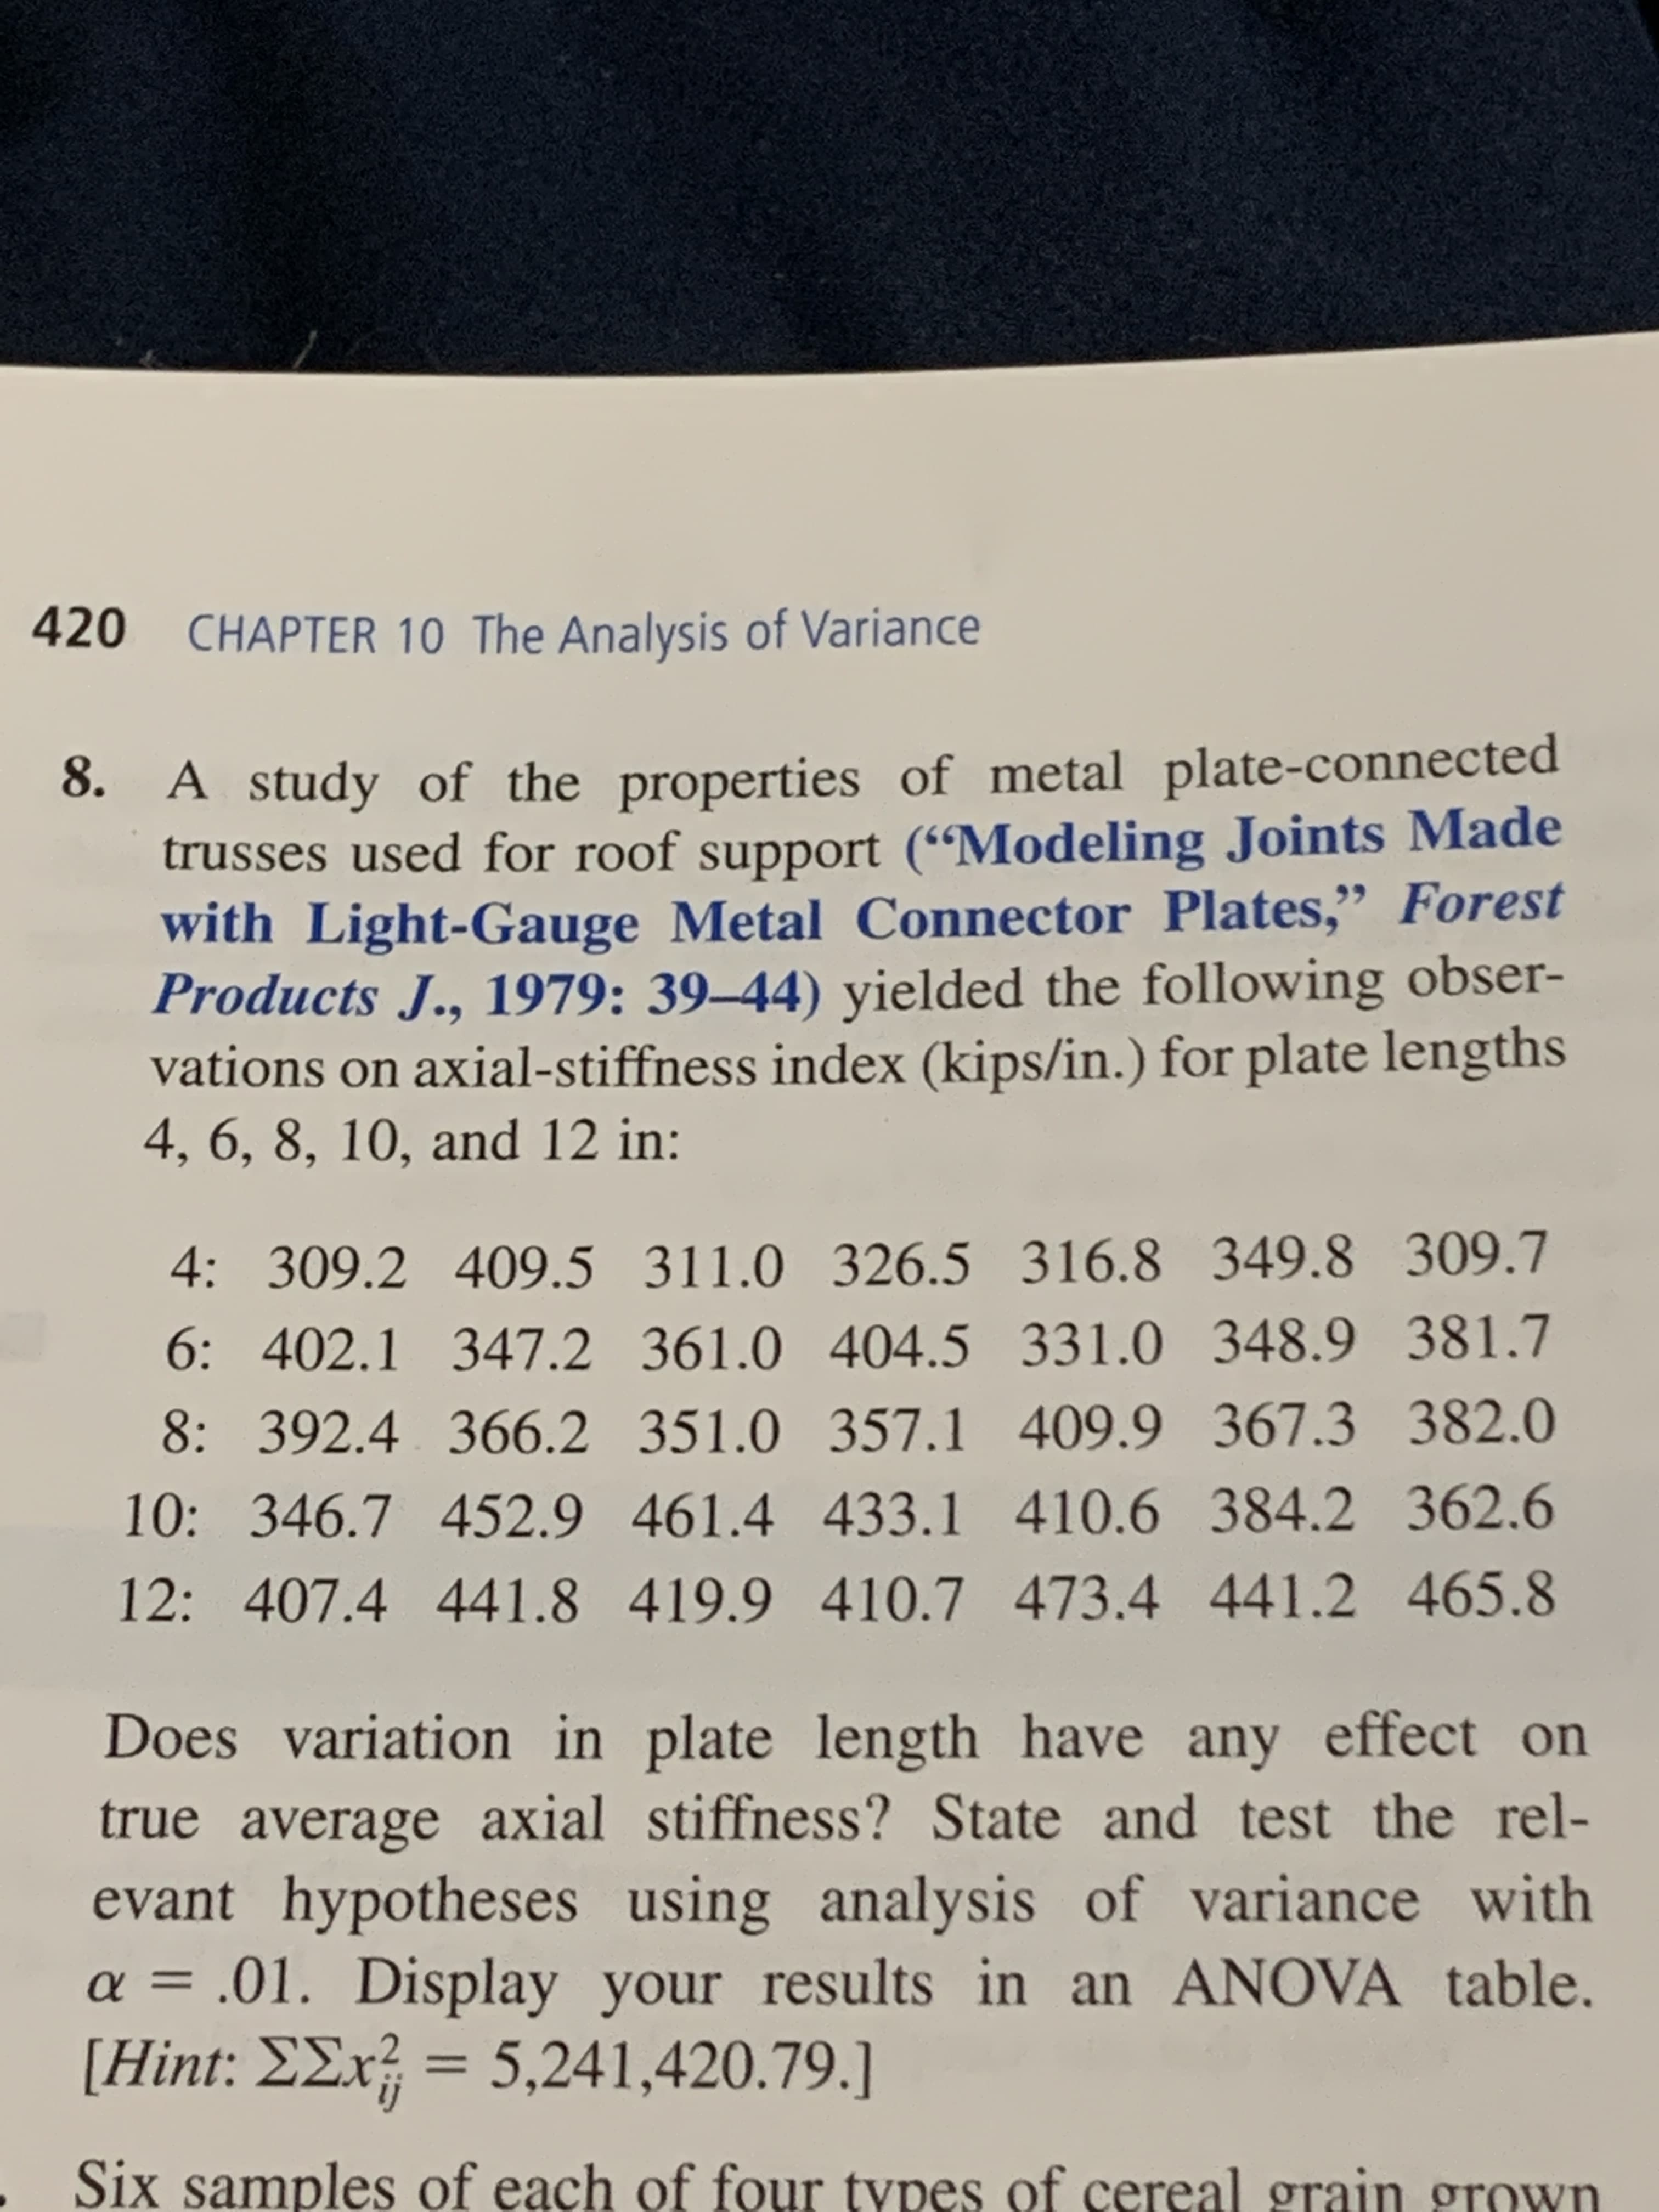 420
CHAPTER 10 The Analysis of Variance
8. A study of the properties of metal plate-connected
trusses used for roof support ("Modeling Joints Made
with Light-Gauge Metal Connector Plates," Forest
Products J., 1979: 39-44) yielded the following obser-
vations on axial-stiffness index (kips/in.) for plate lengths
4, 6, 8, 10, and 12 in:
4:
309.2 409.5 311.0 326.5 316.8 349.8 309.7
6: 402.1 347.2 361.0 404.5 331.0 348.9 381.7
8: 392.4 366.2 351.0 357.1 409.9 367.3 382.0
10: 346.7 452.9 461.4 433.1 410.6 384.2 362.6
12: 407.4 441.8 419.9 410.7 473.4 441.2 465.8
Does variation in plate length have any effect on
true average axial stiffness? State and test the rel-
evant hypotheses using analysis of variance with
.01. Display your results in an ANOVA table.
[Hint: ΣEx} = 5,241,420.79.]
α=
Six samples of each of four types of cereal grain grown